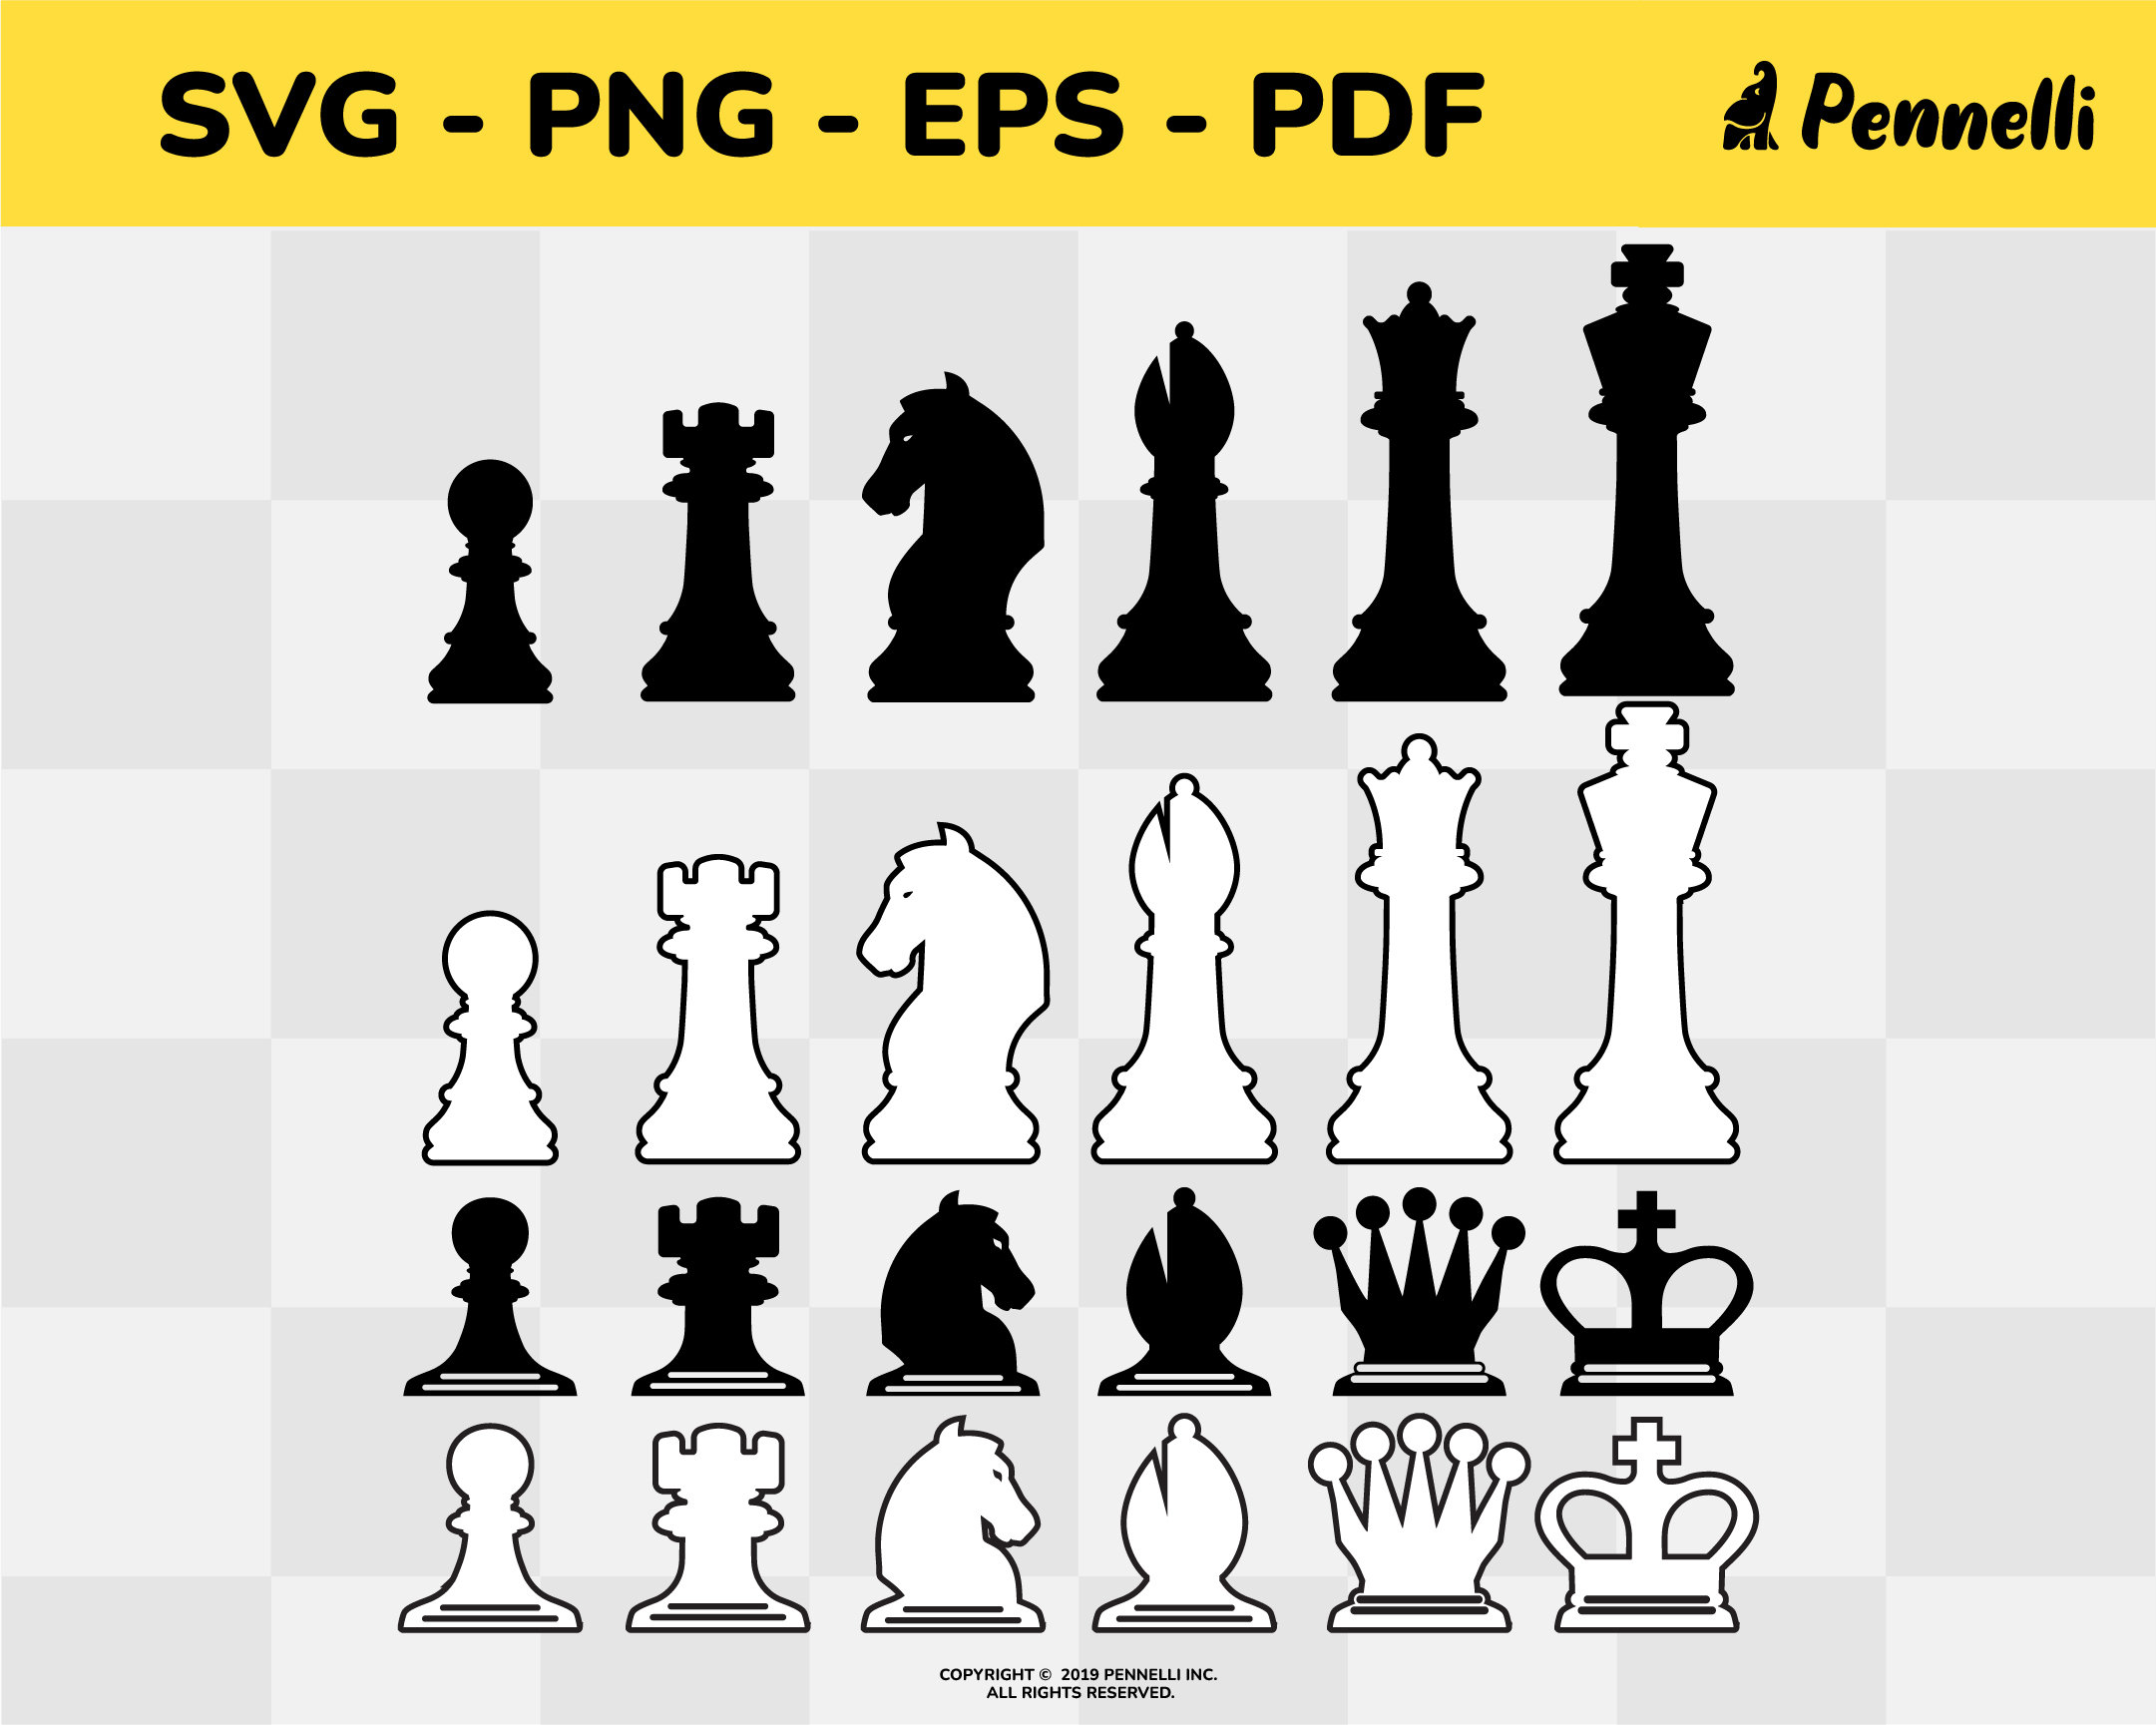 Chess Piece - King Stencil  Chess pieces, Chess, Chess king